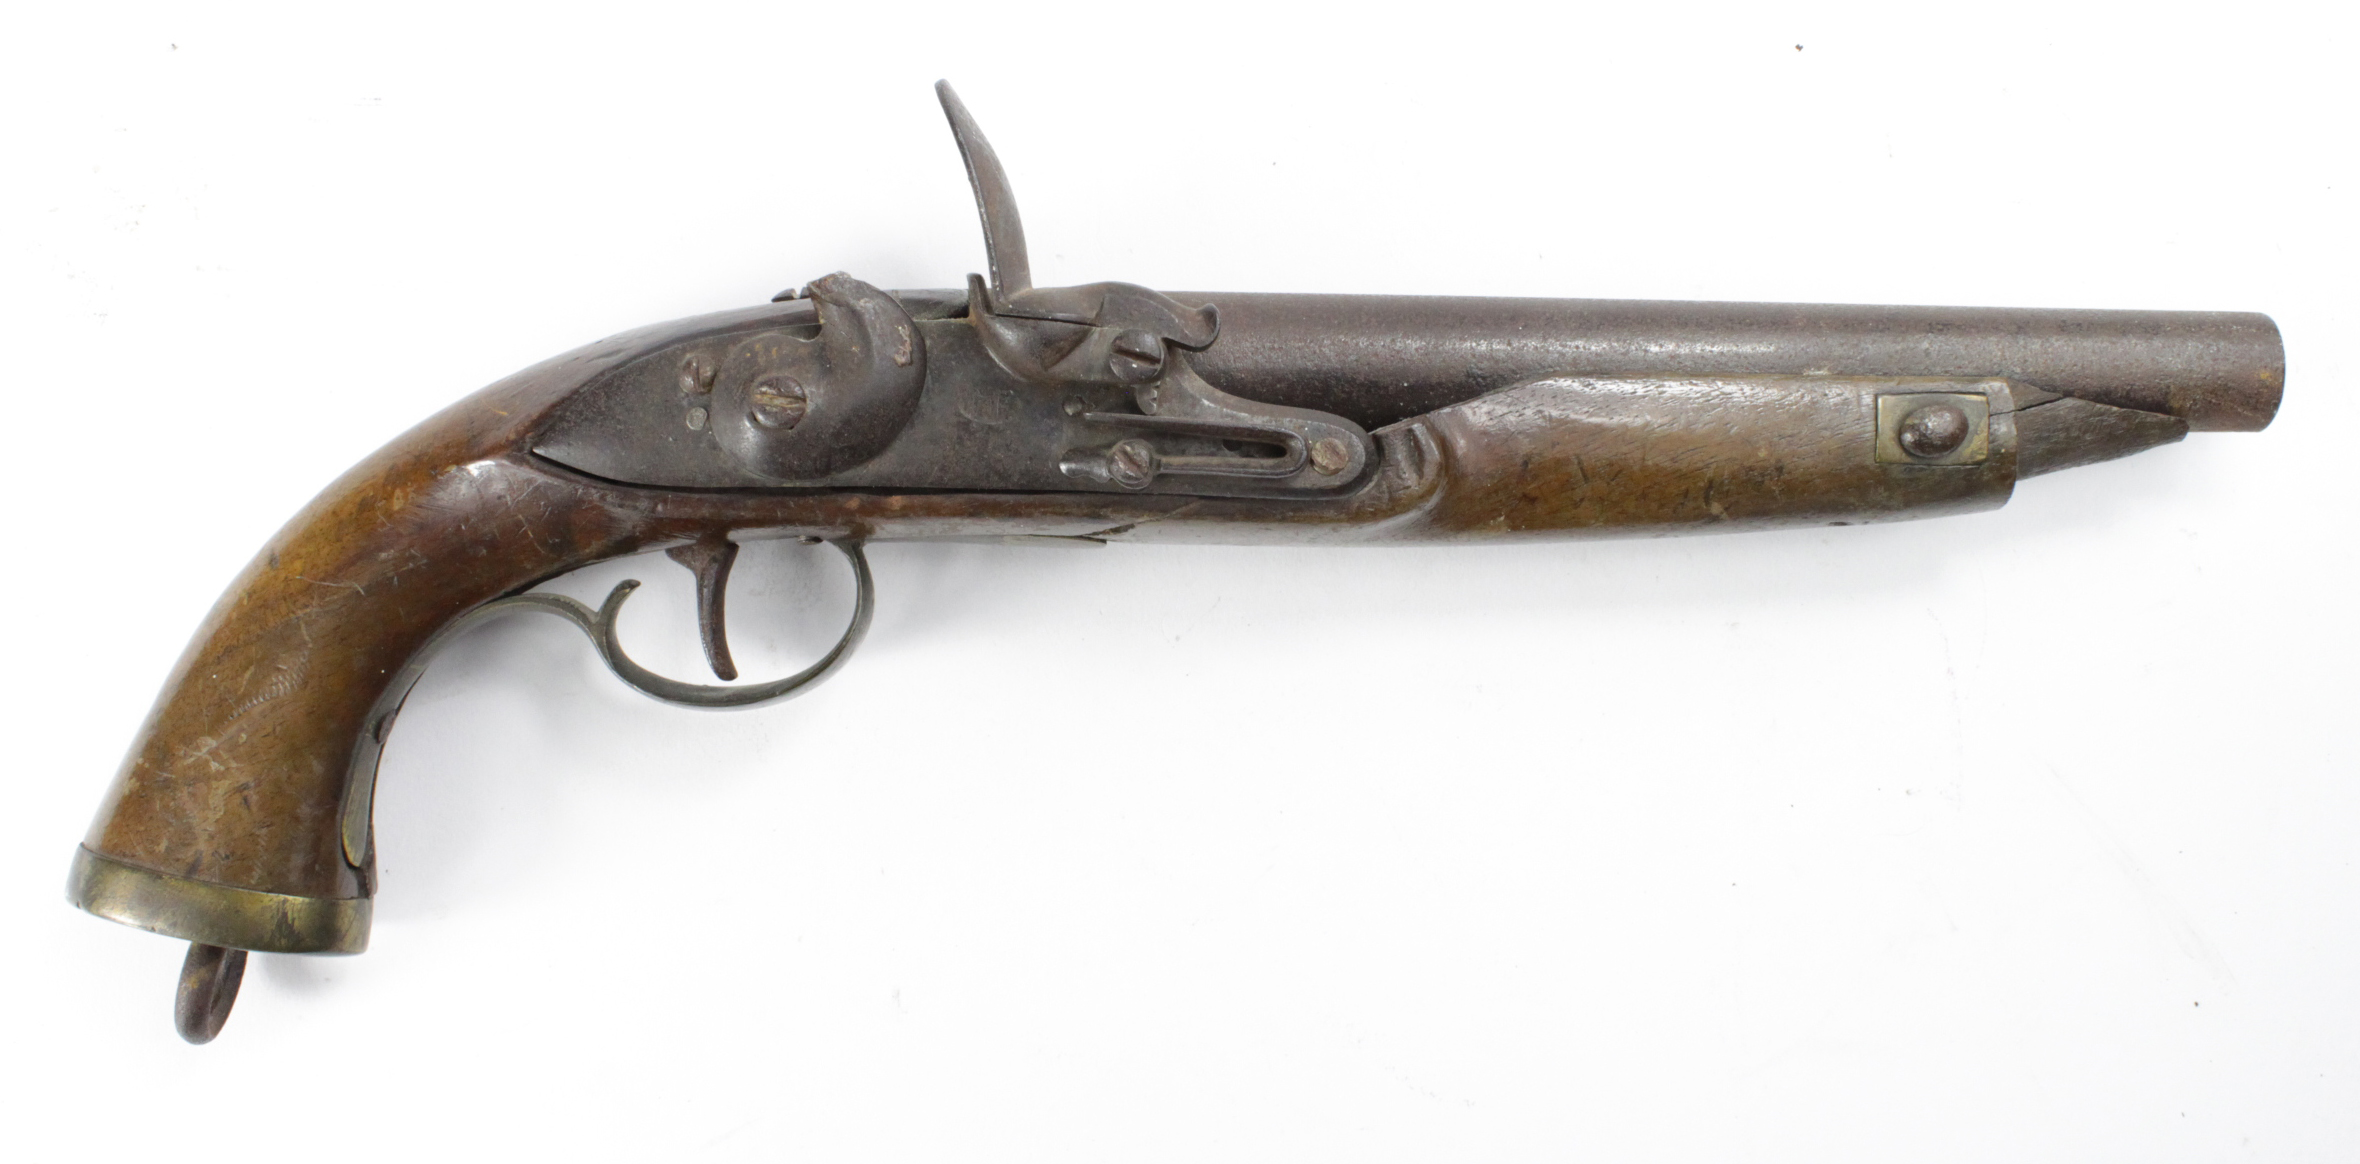 Flintlock Pistol in need of restoration. Lock with armourers mark (possibly Turkish?). Woodwork with